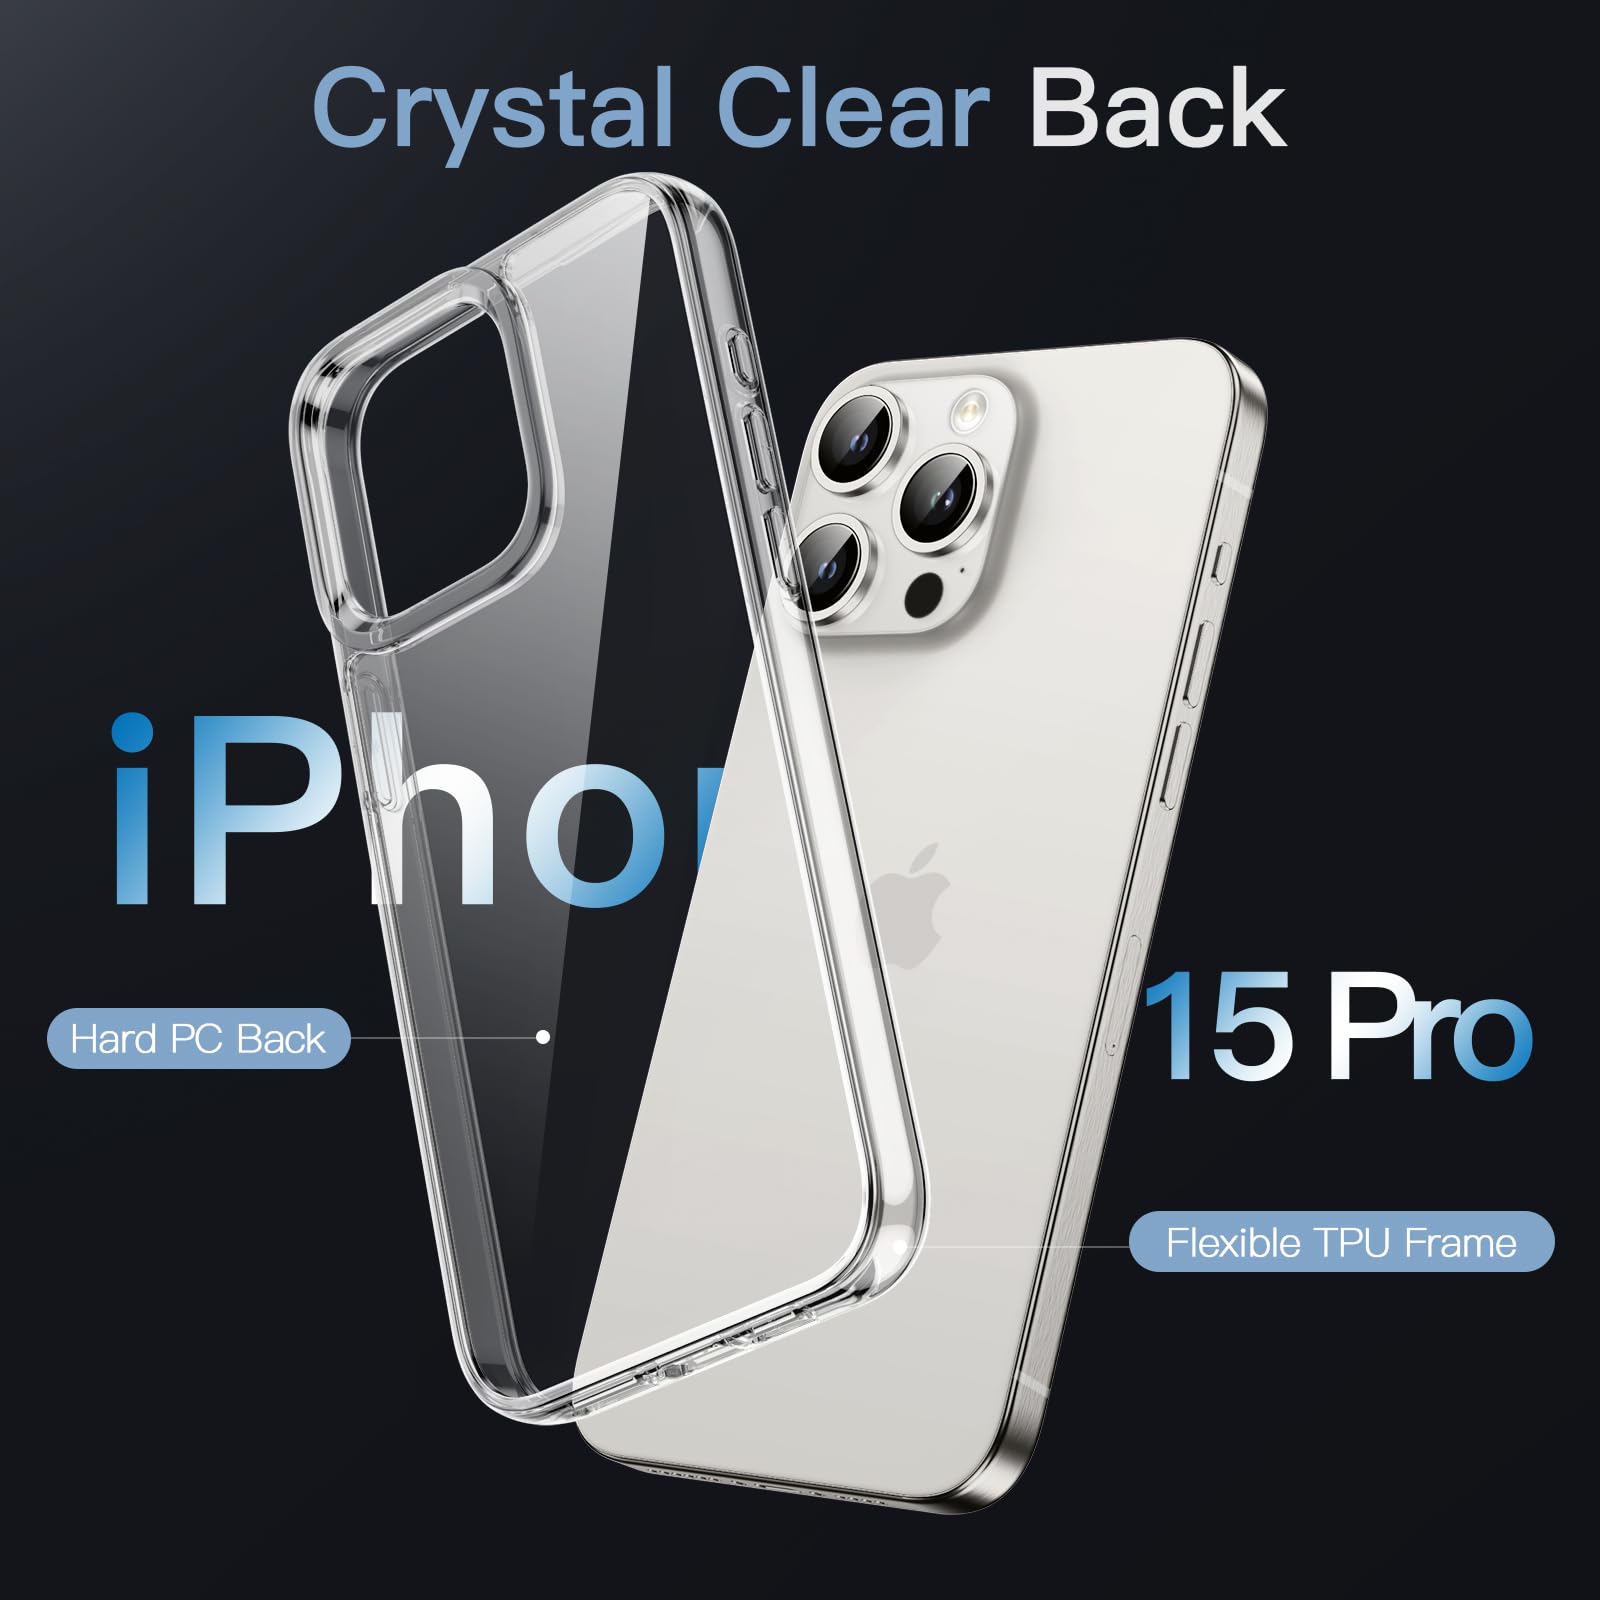 JETech Case for iPhone 15 Pro 6.1-Inch (NOT for iPhone 15 Pro Max 6.7-Inch), Non-Yellowing Shockproof Phone Bumper Cover, Anti-Scratch Clear Back (Clear)